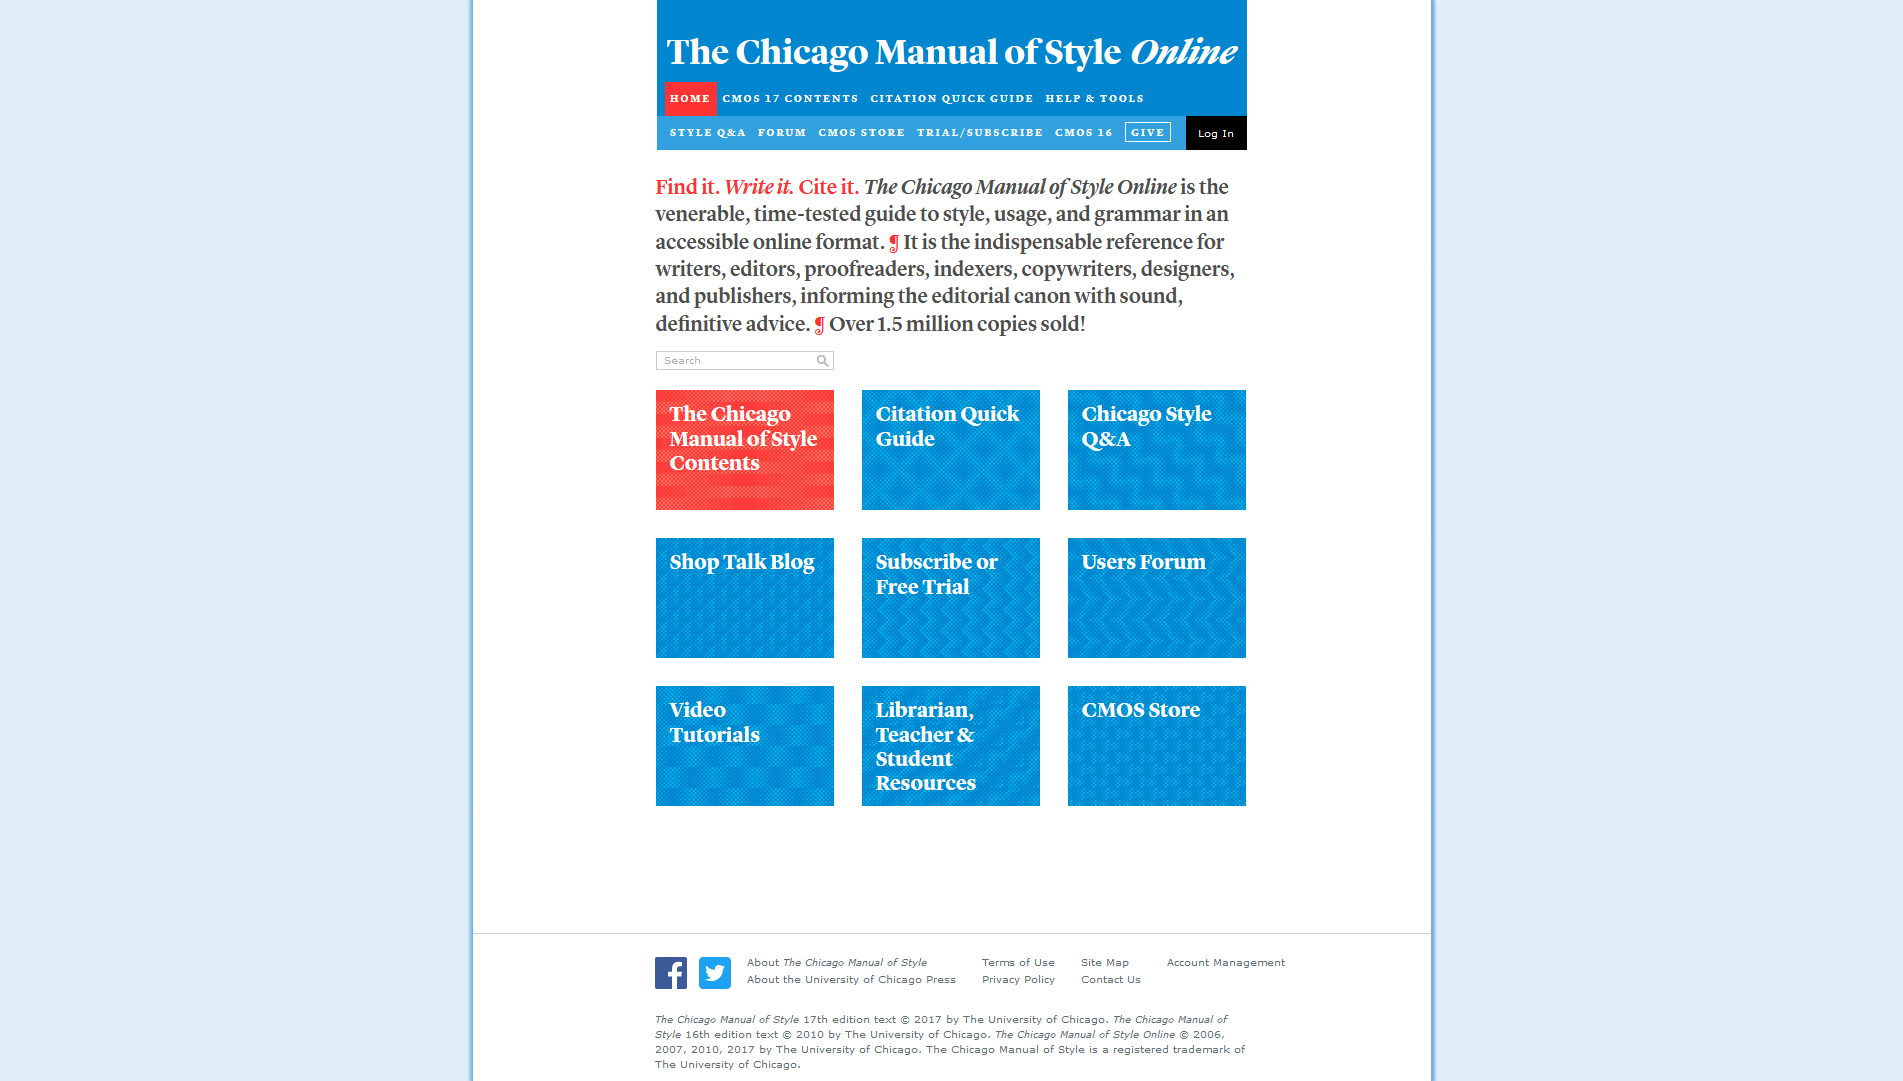 Menú del Chicago Manual of Style Online